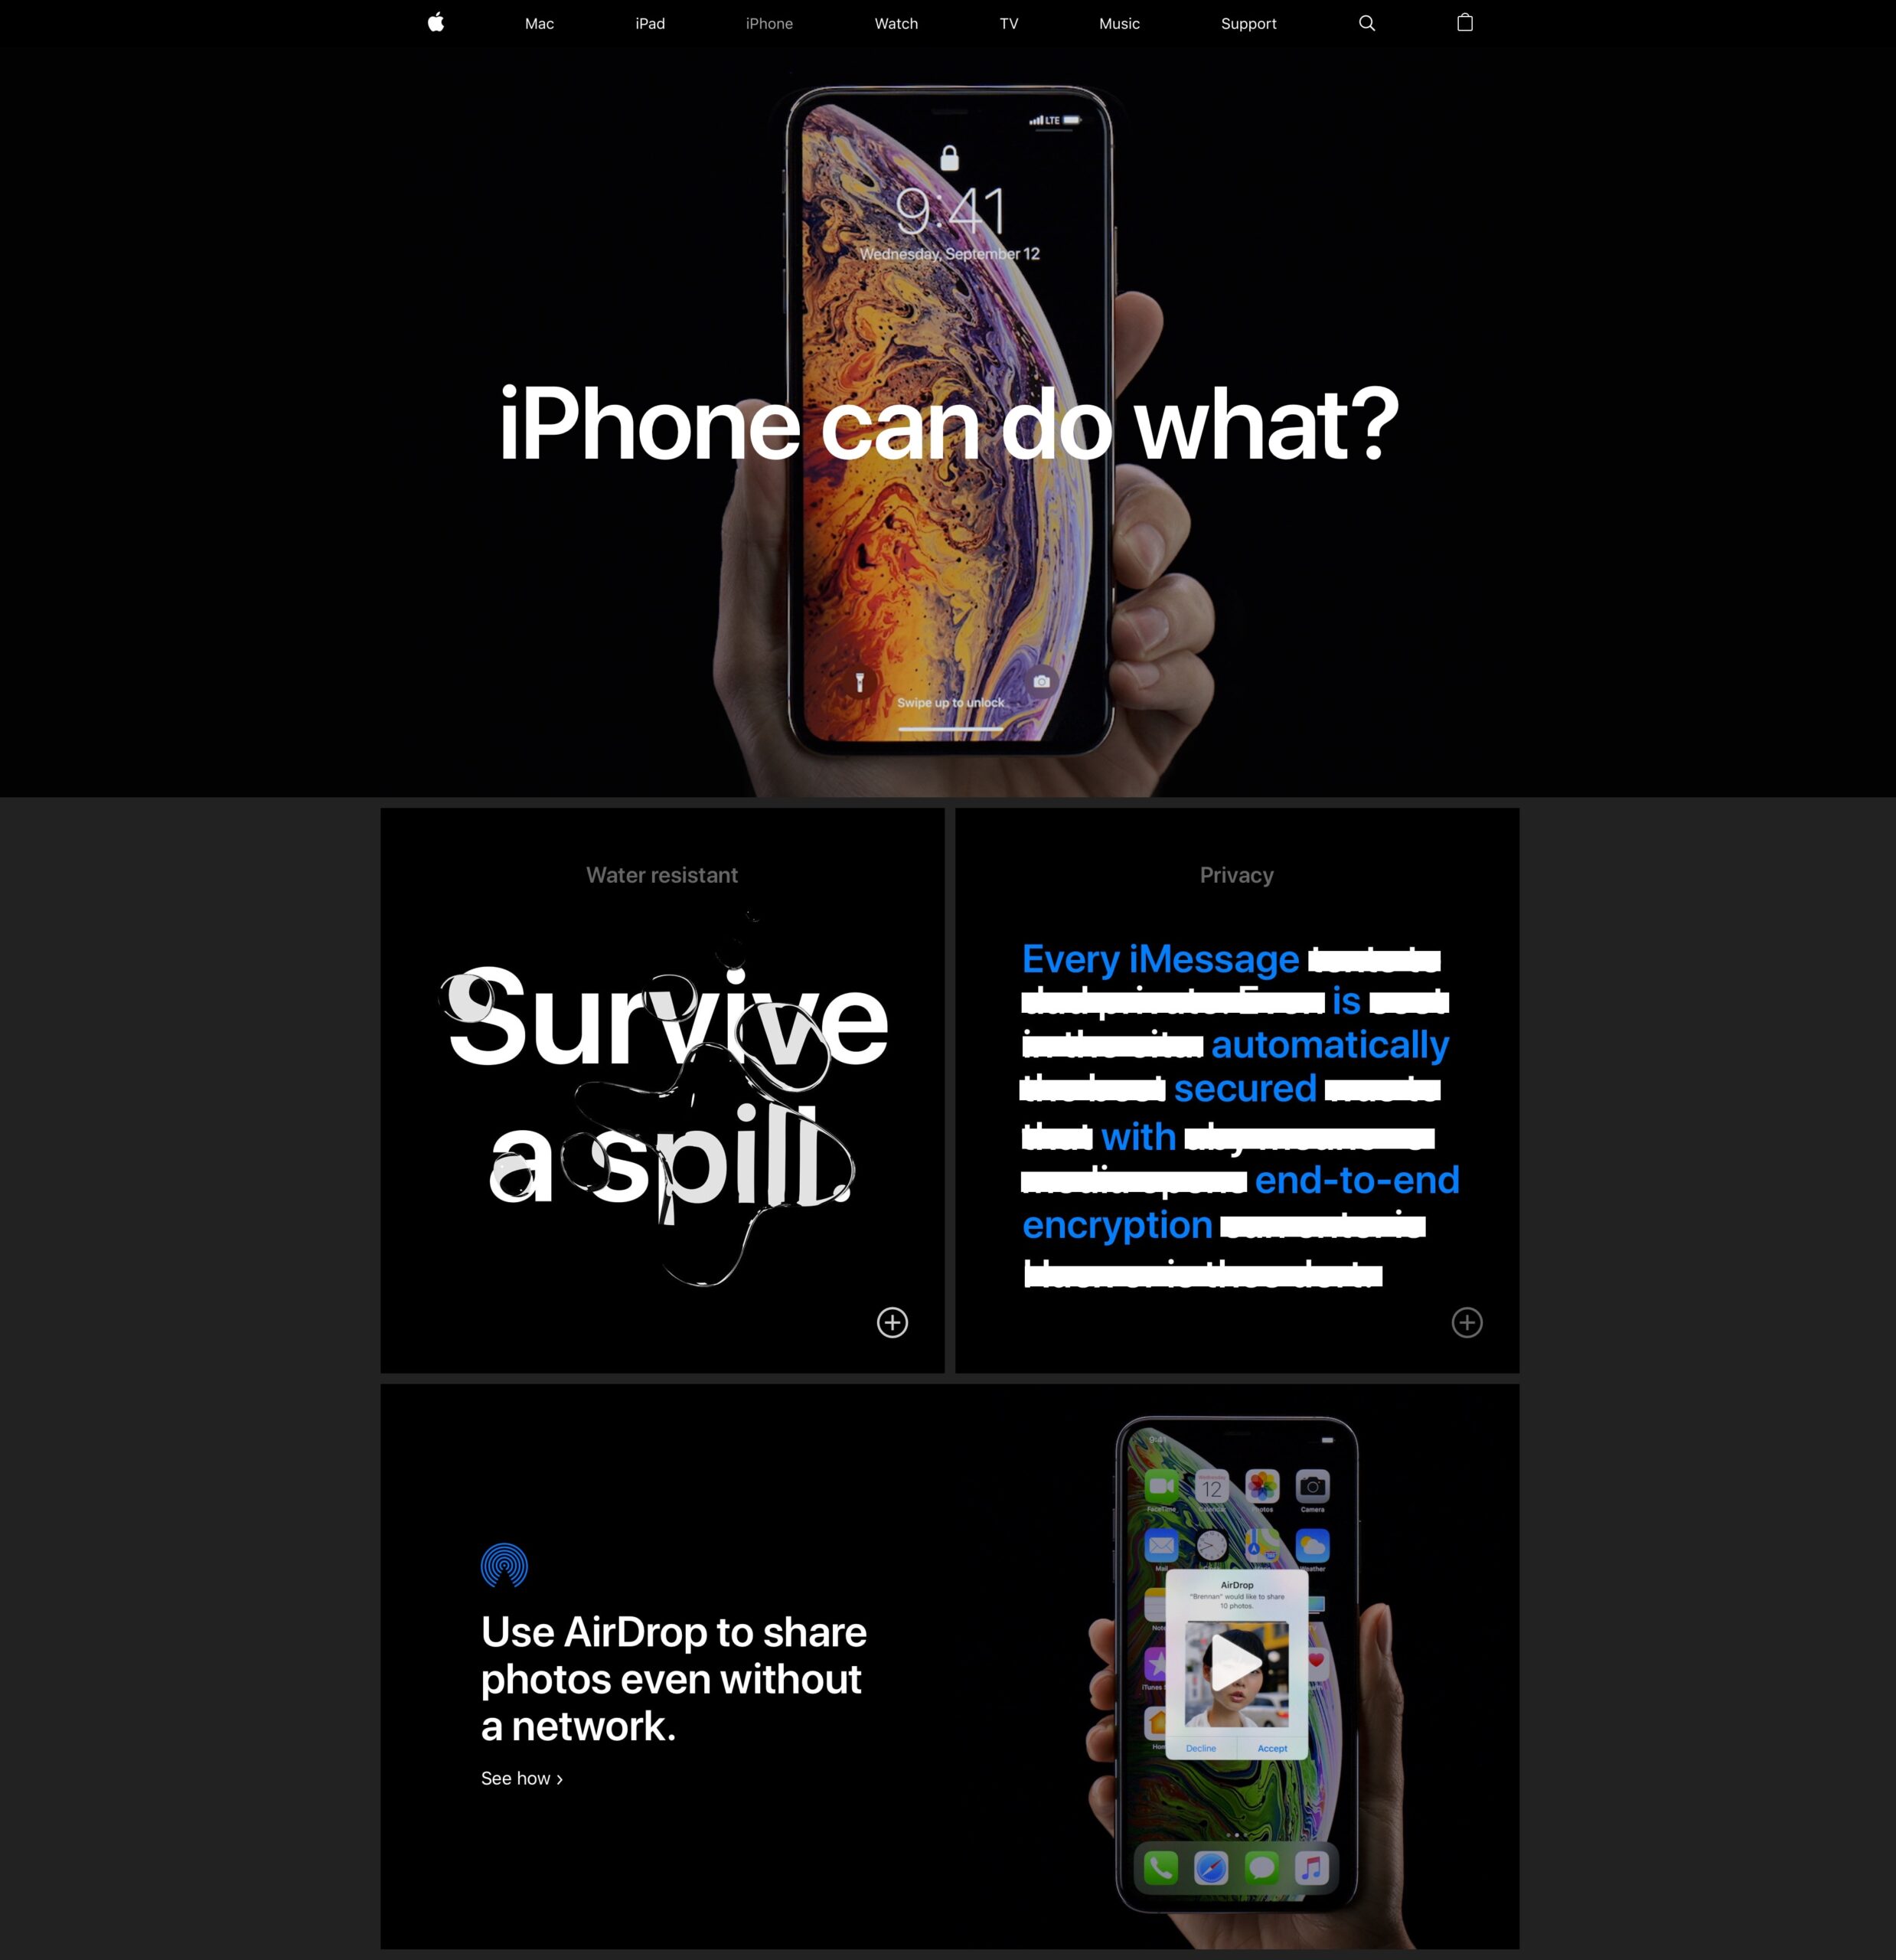 Apple steps up iPhone advertising with new feature page [atualizado 2x]